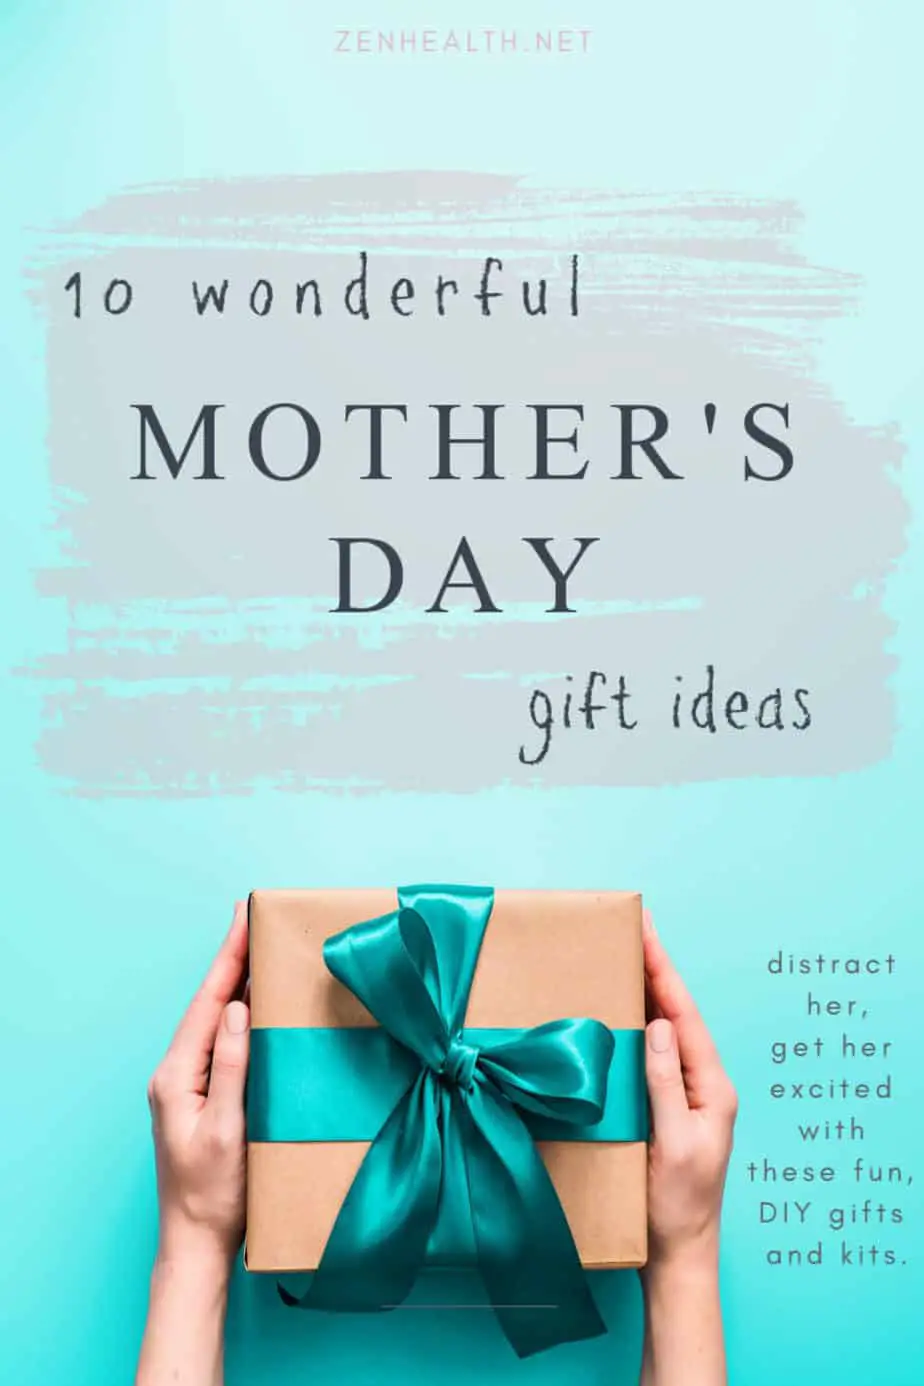 10 wonderful mother's day gift ideas